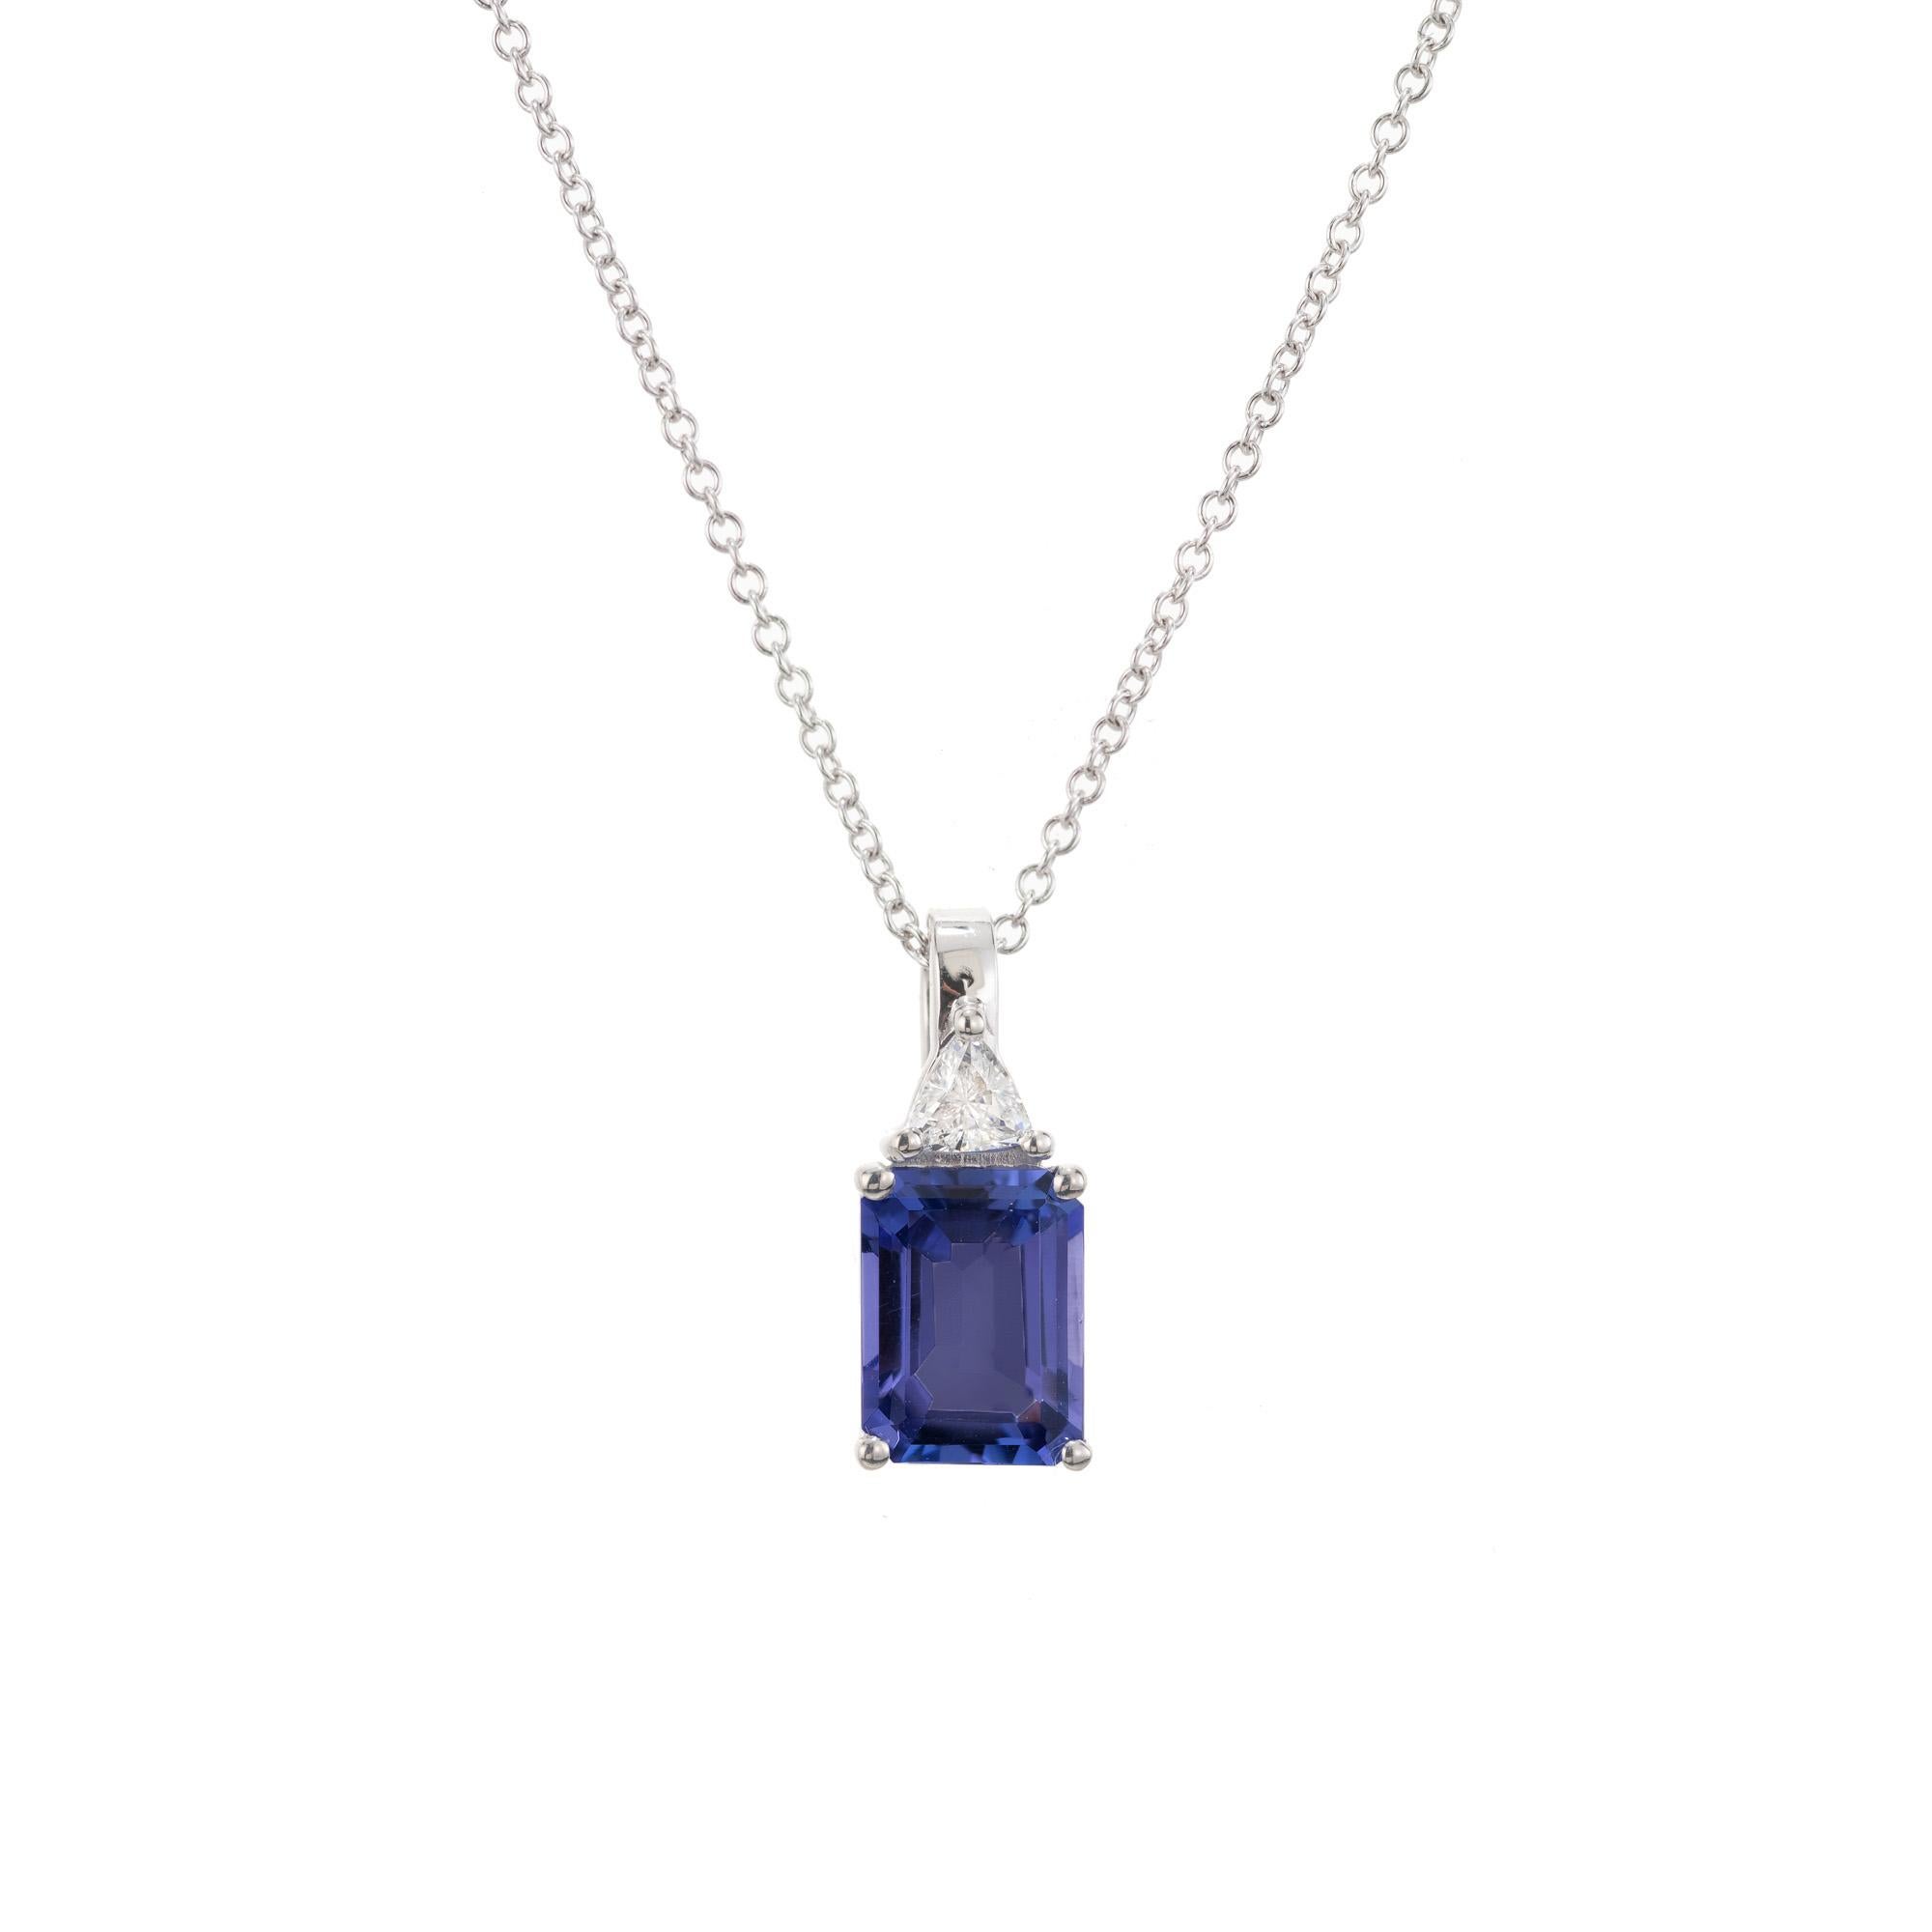 Beautiful tanzanite and diamond pendant necklace. 1.30ct emerald cut tanzanite mounted in a 14k white gold four prong setting accented with 1 trilliant shape diamond. 14k white gold 18 inch chain. Designed and crafted in the Peter Suchy Workshop

1